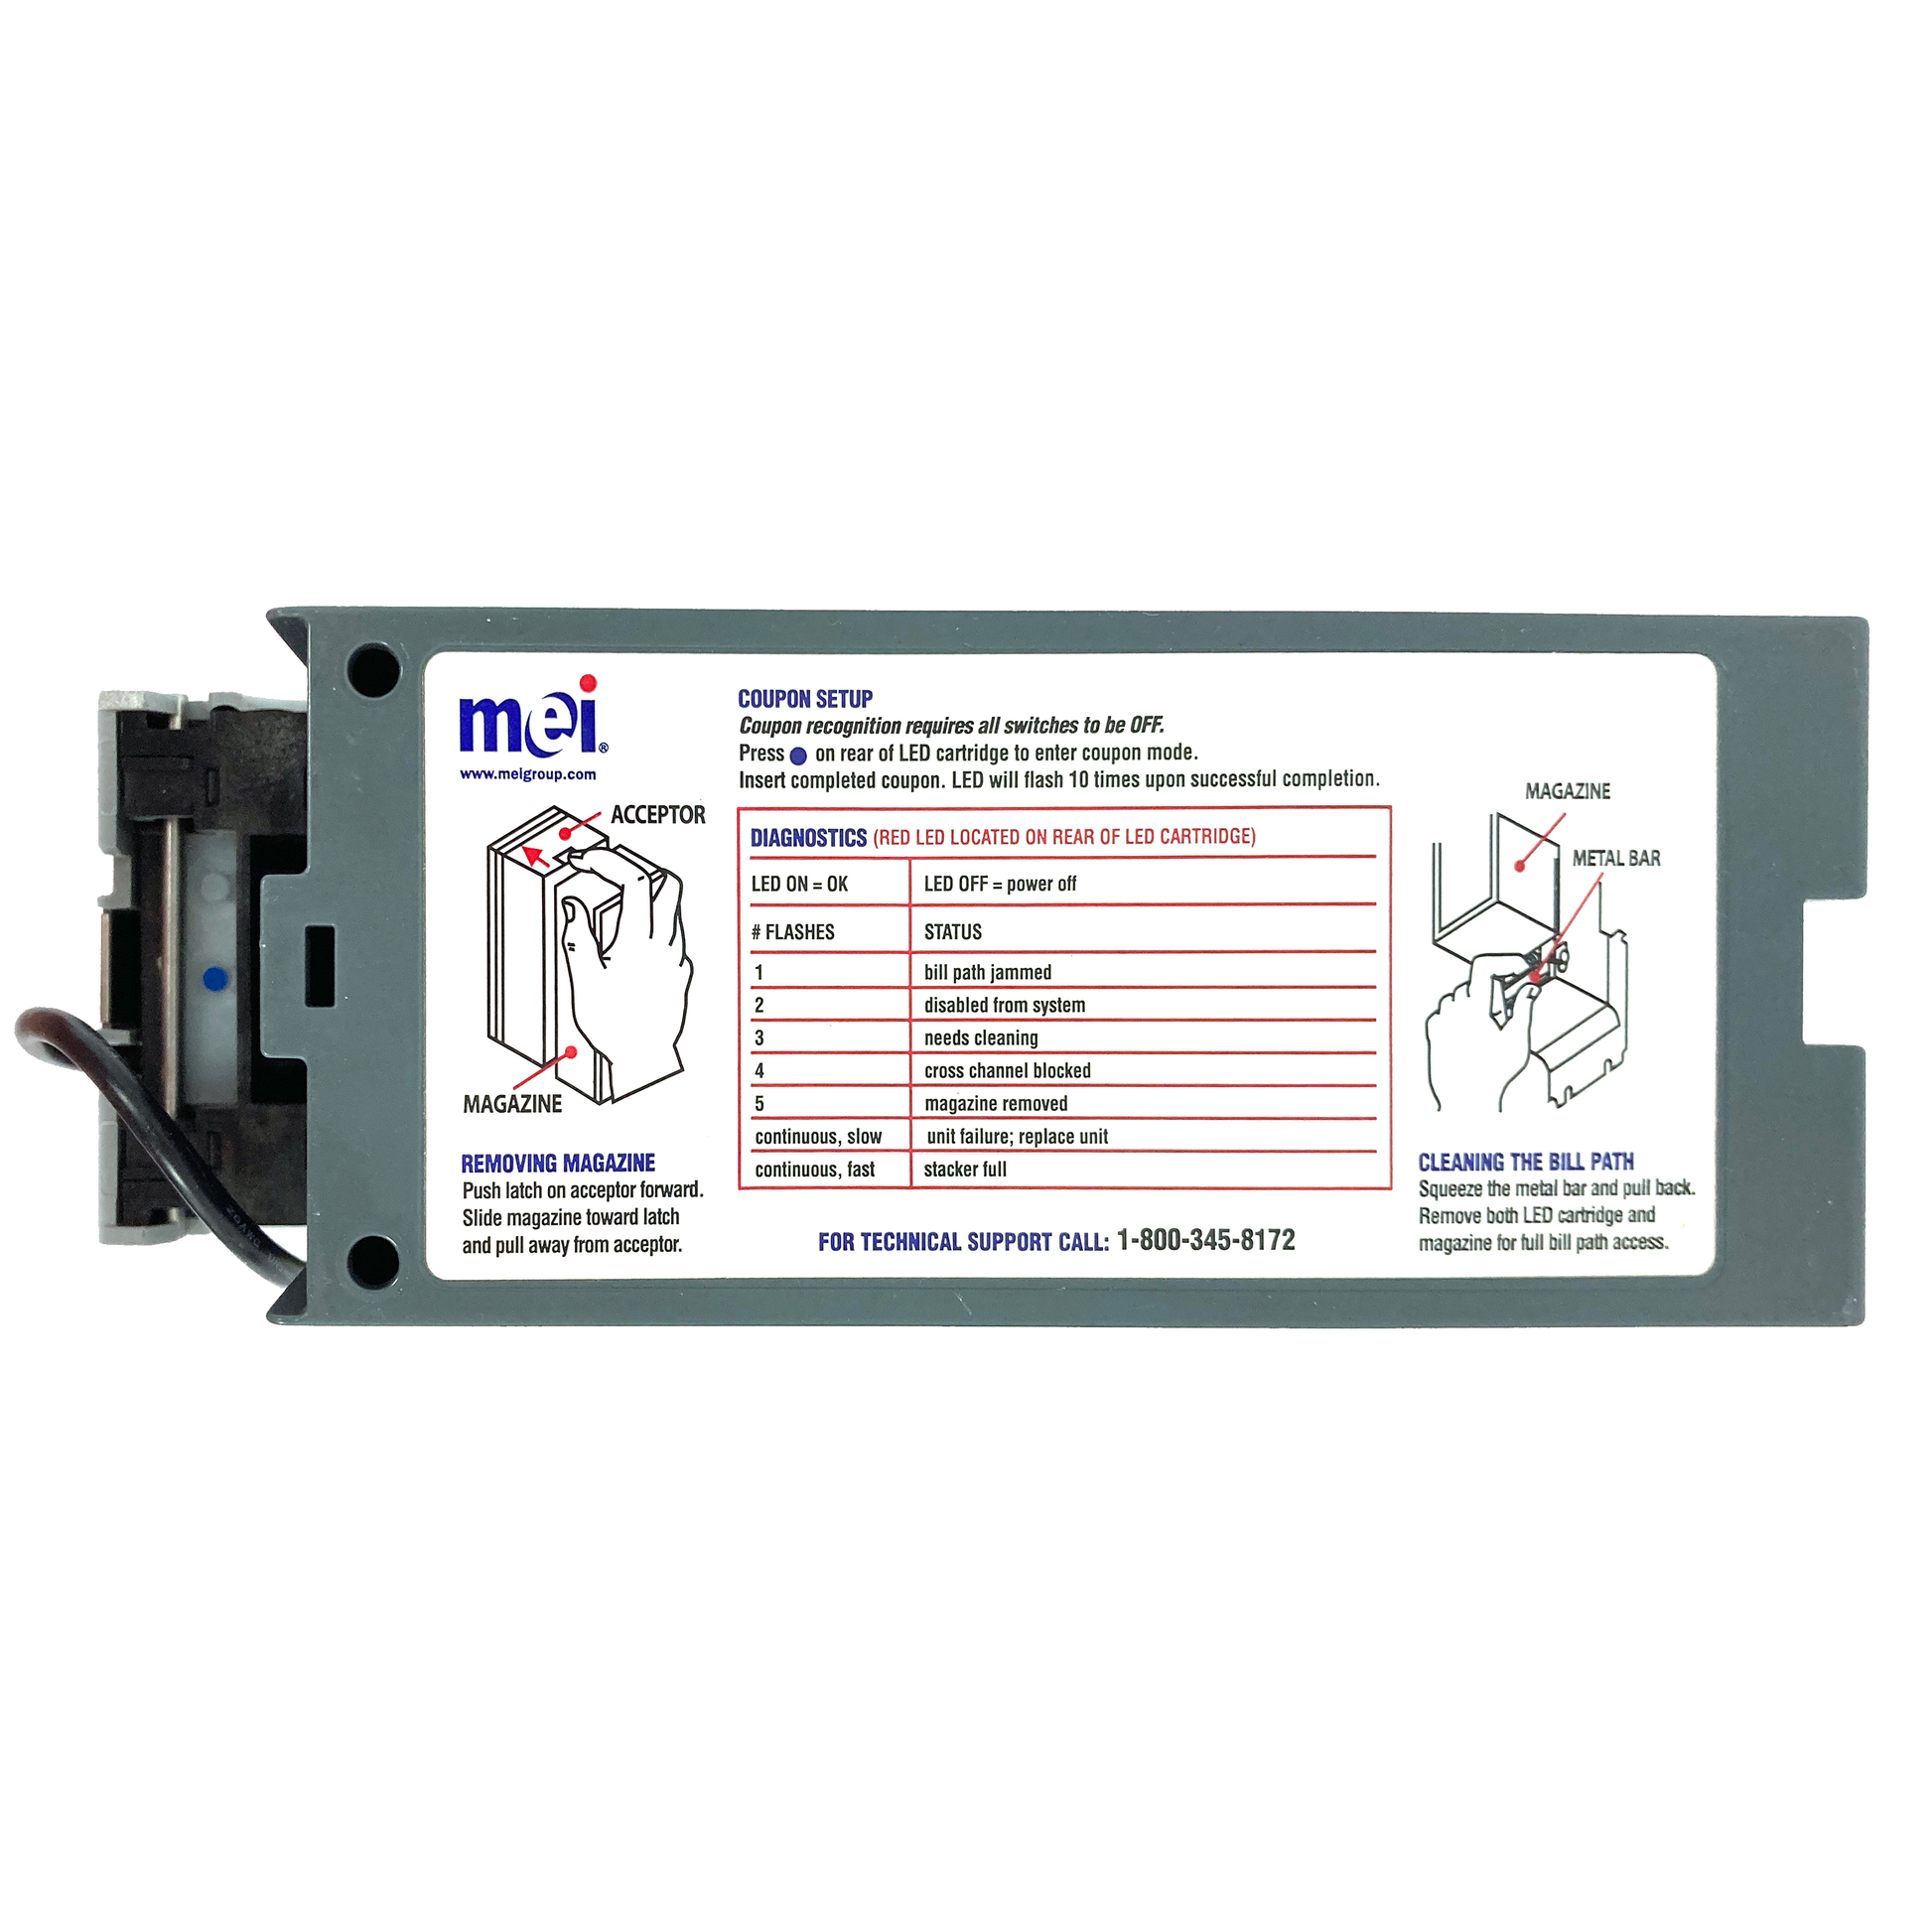 This MEI Bill Acceptor was the standard for most Pennsylvania Skill machines made prior to the Summer of 2019. Sold by Miele Manufacturing.